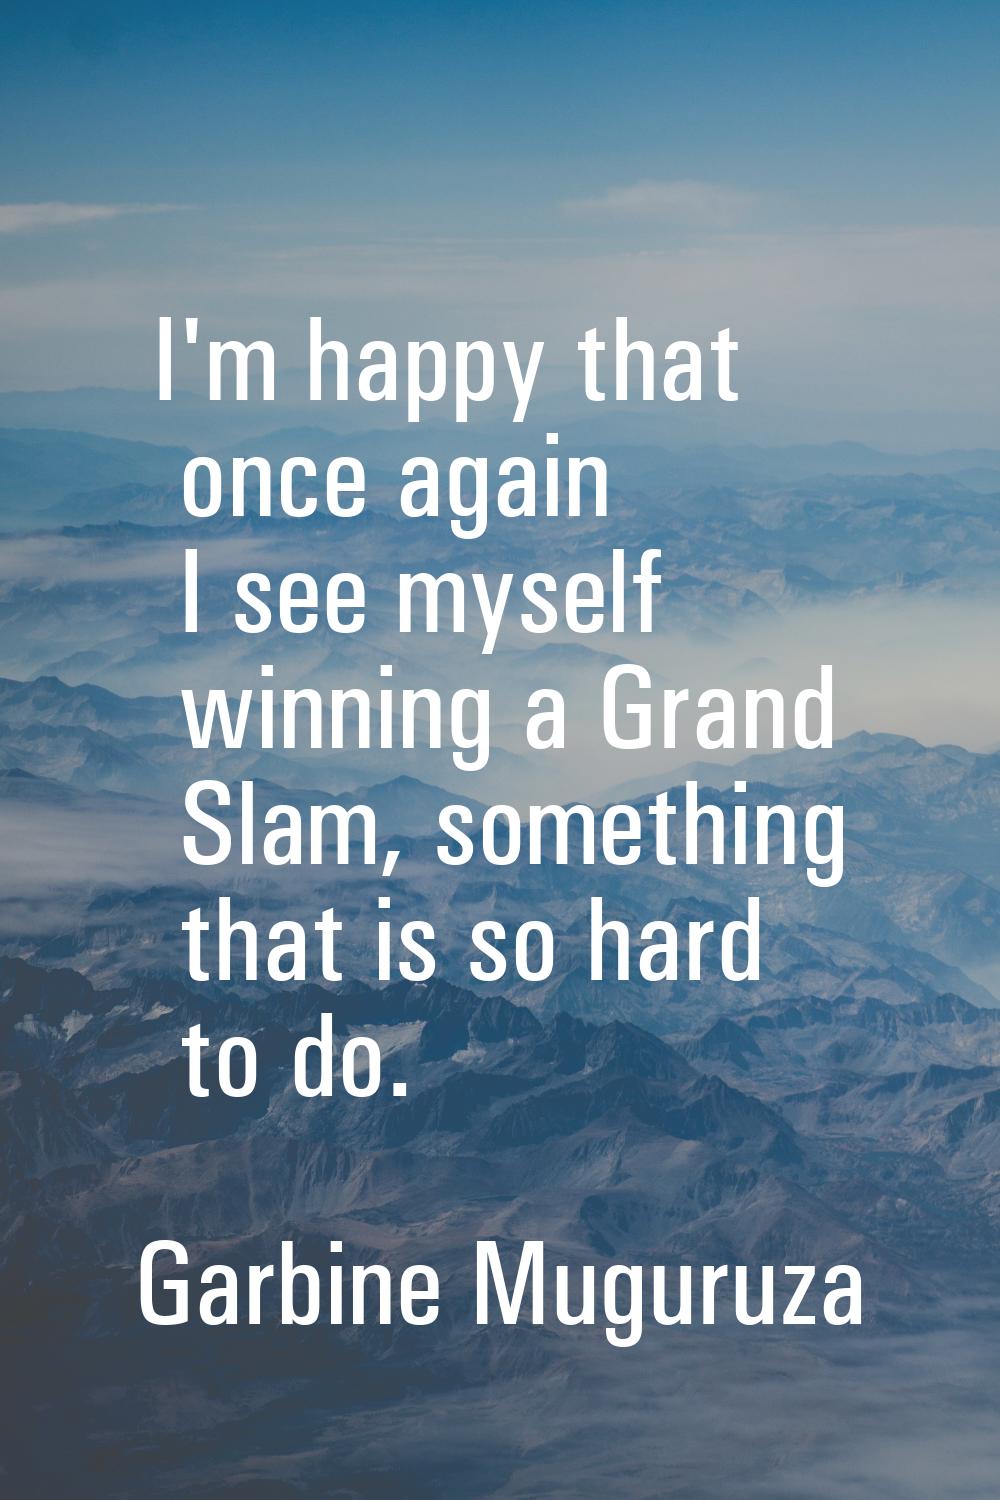 I'm happy that once again I see myself winning a Grand Slam, something that is so hard to do.